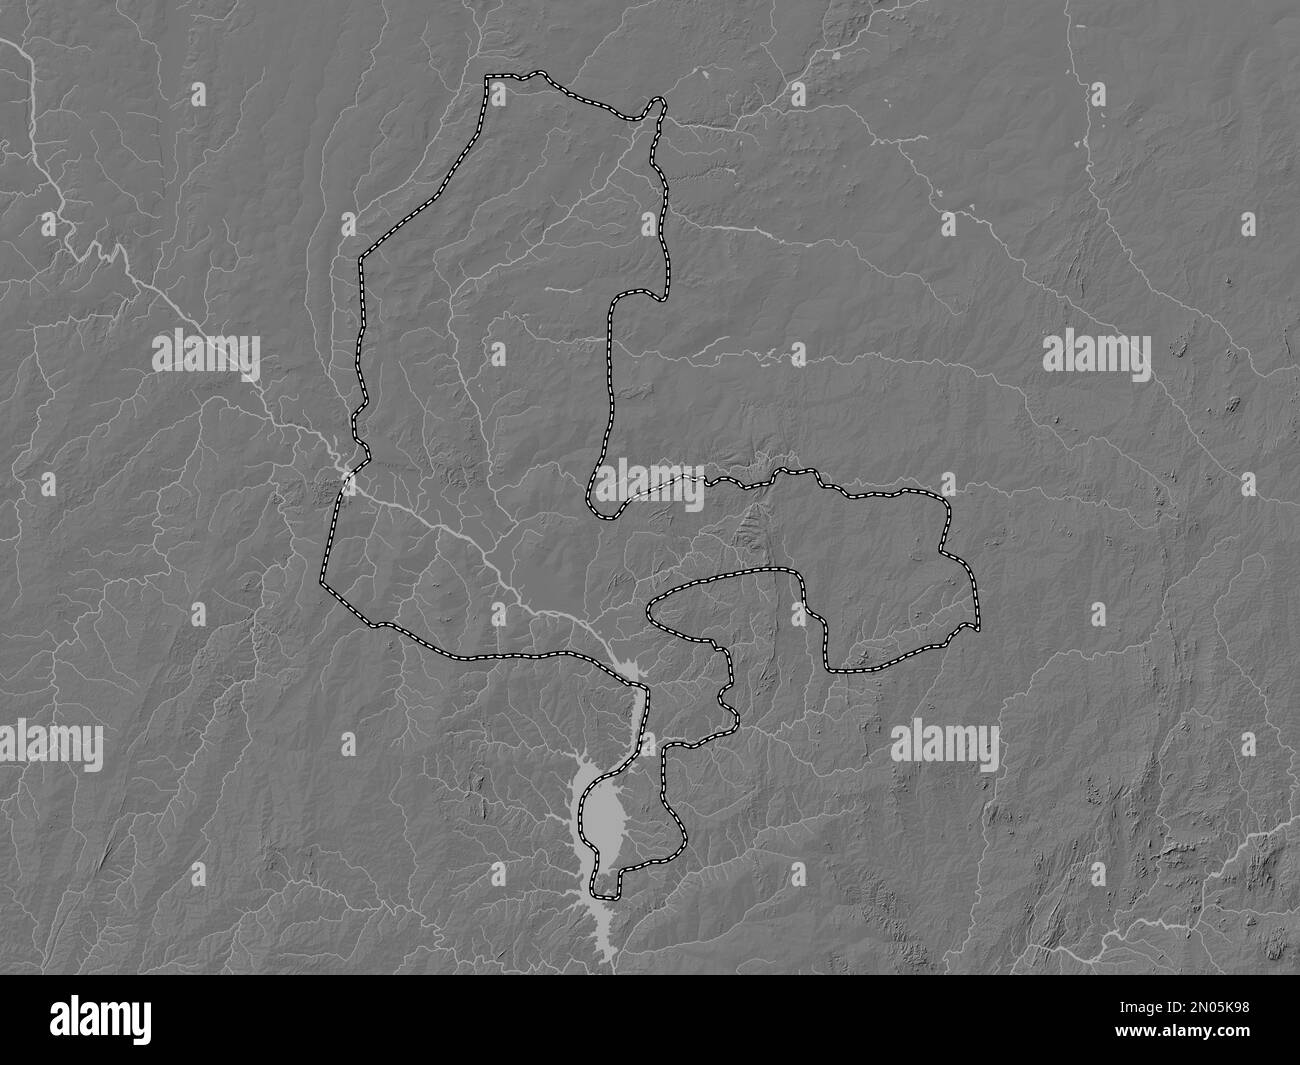 Kebbi, state of Nigeria. Bilevel elevation map with lakes and rivers Stock Photo